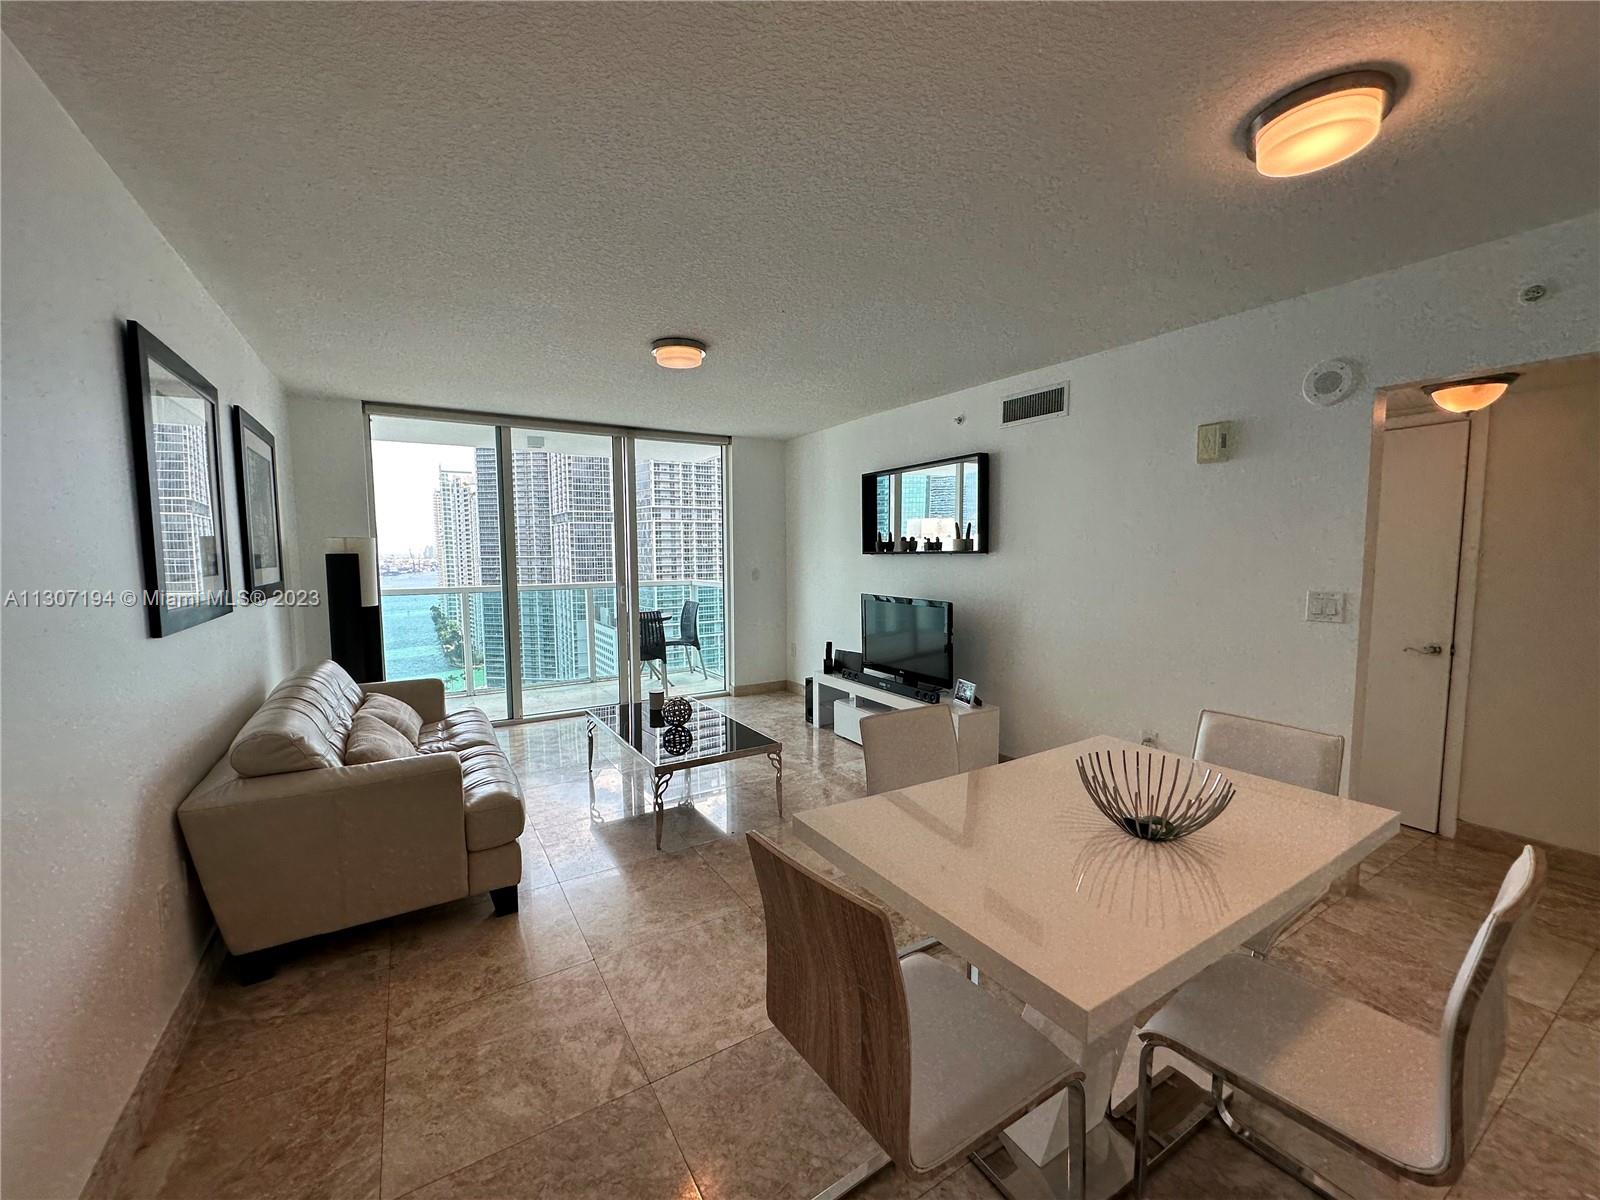 Photo 1 of Brickell On The River Apt 2710 in Miami - MLS A11307194